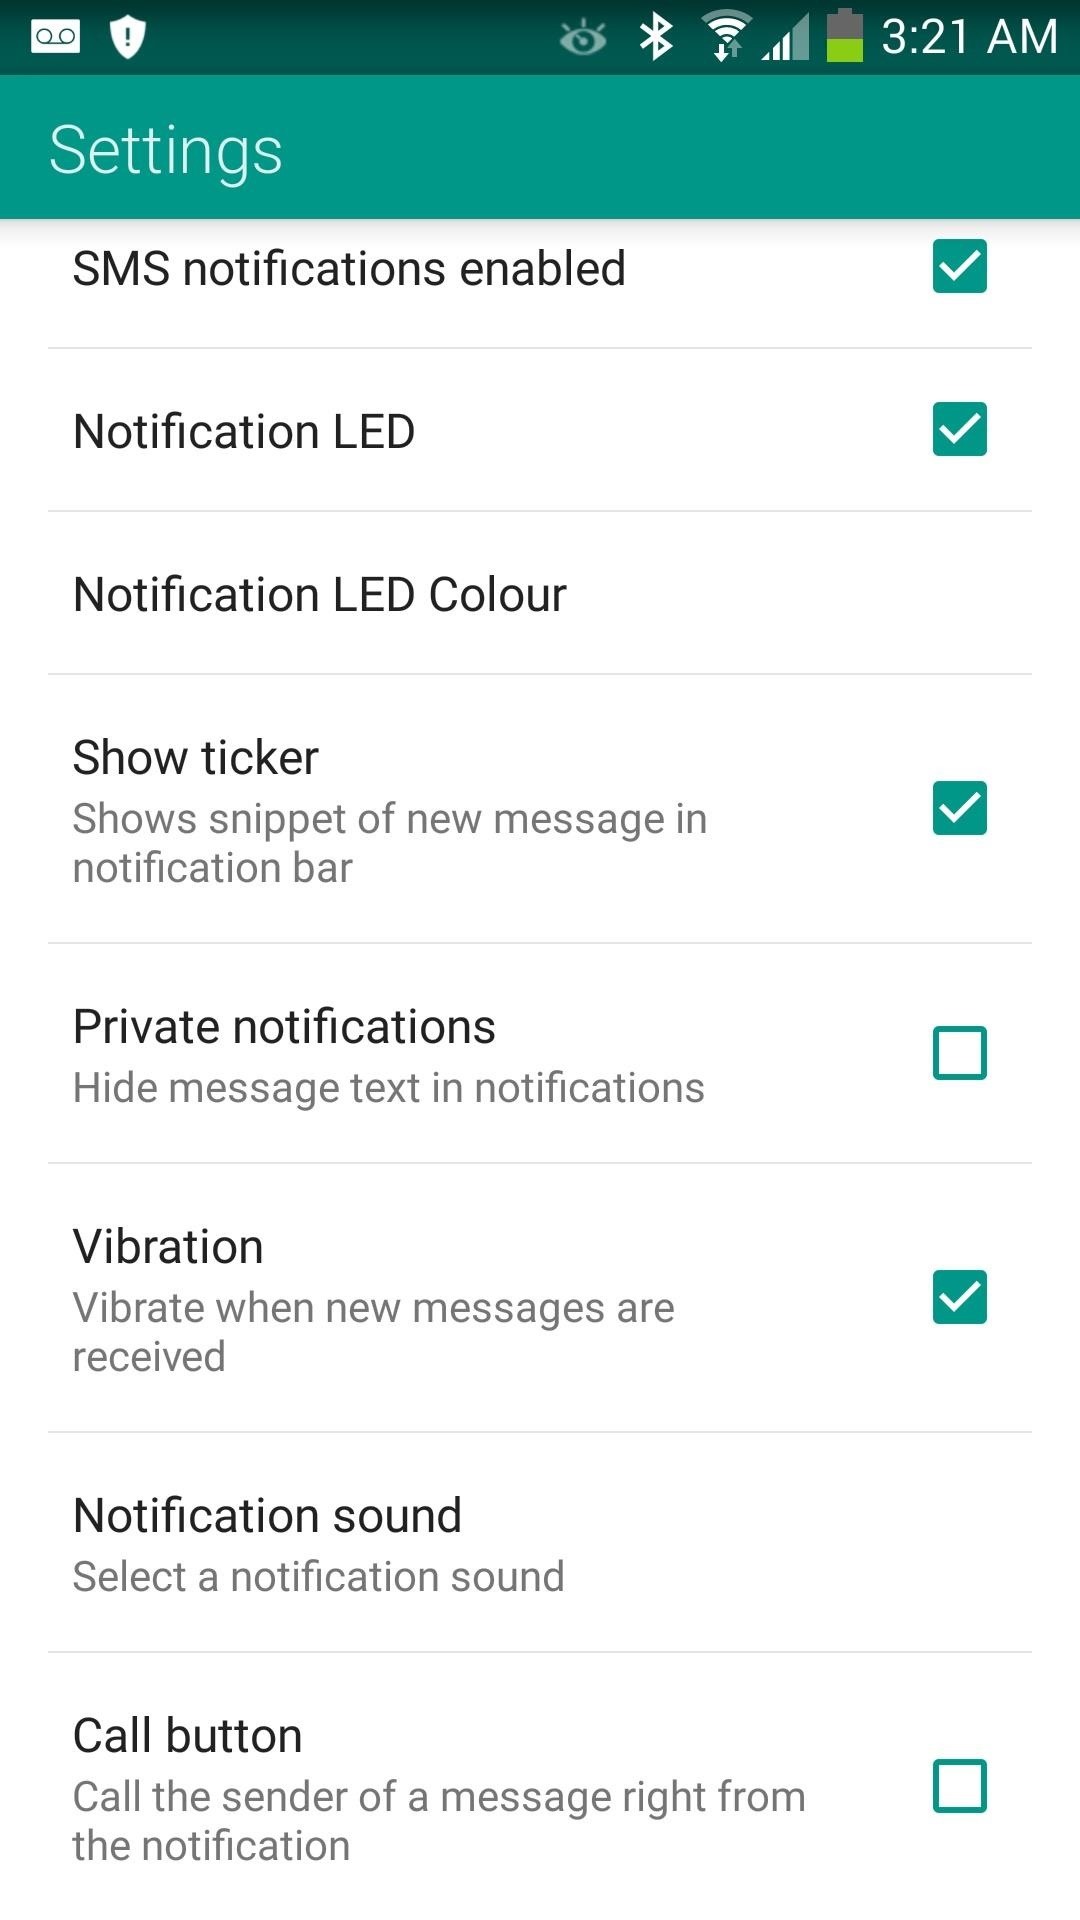 Get a Taste of Android L's Material Design with QKSMS Messaging